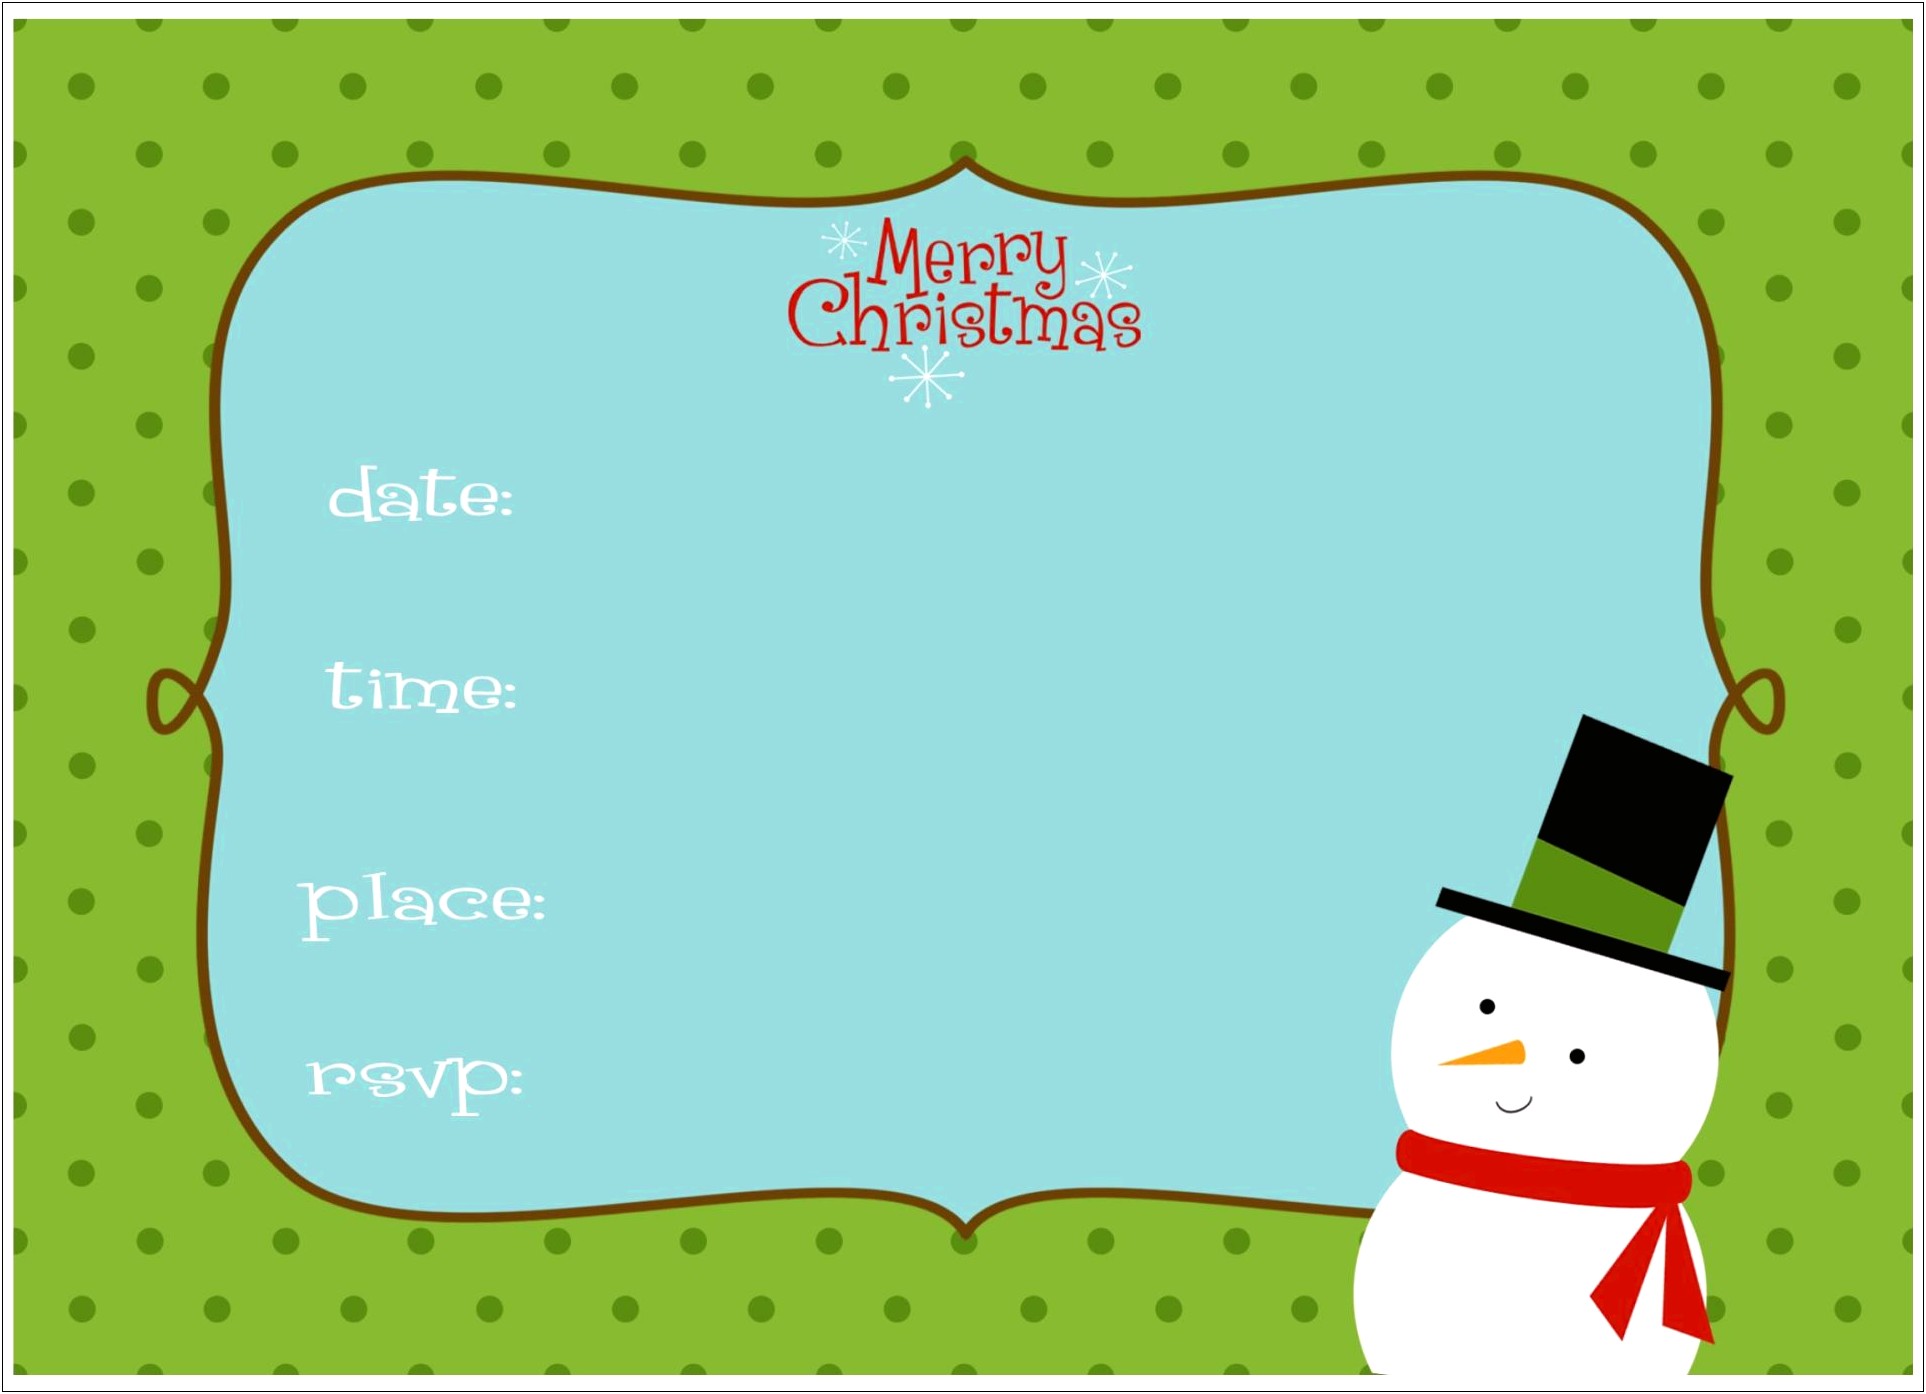 Free Christmas Dinner Party Invitation Templates